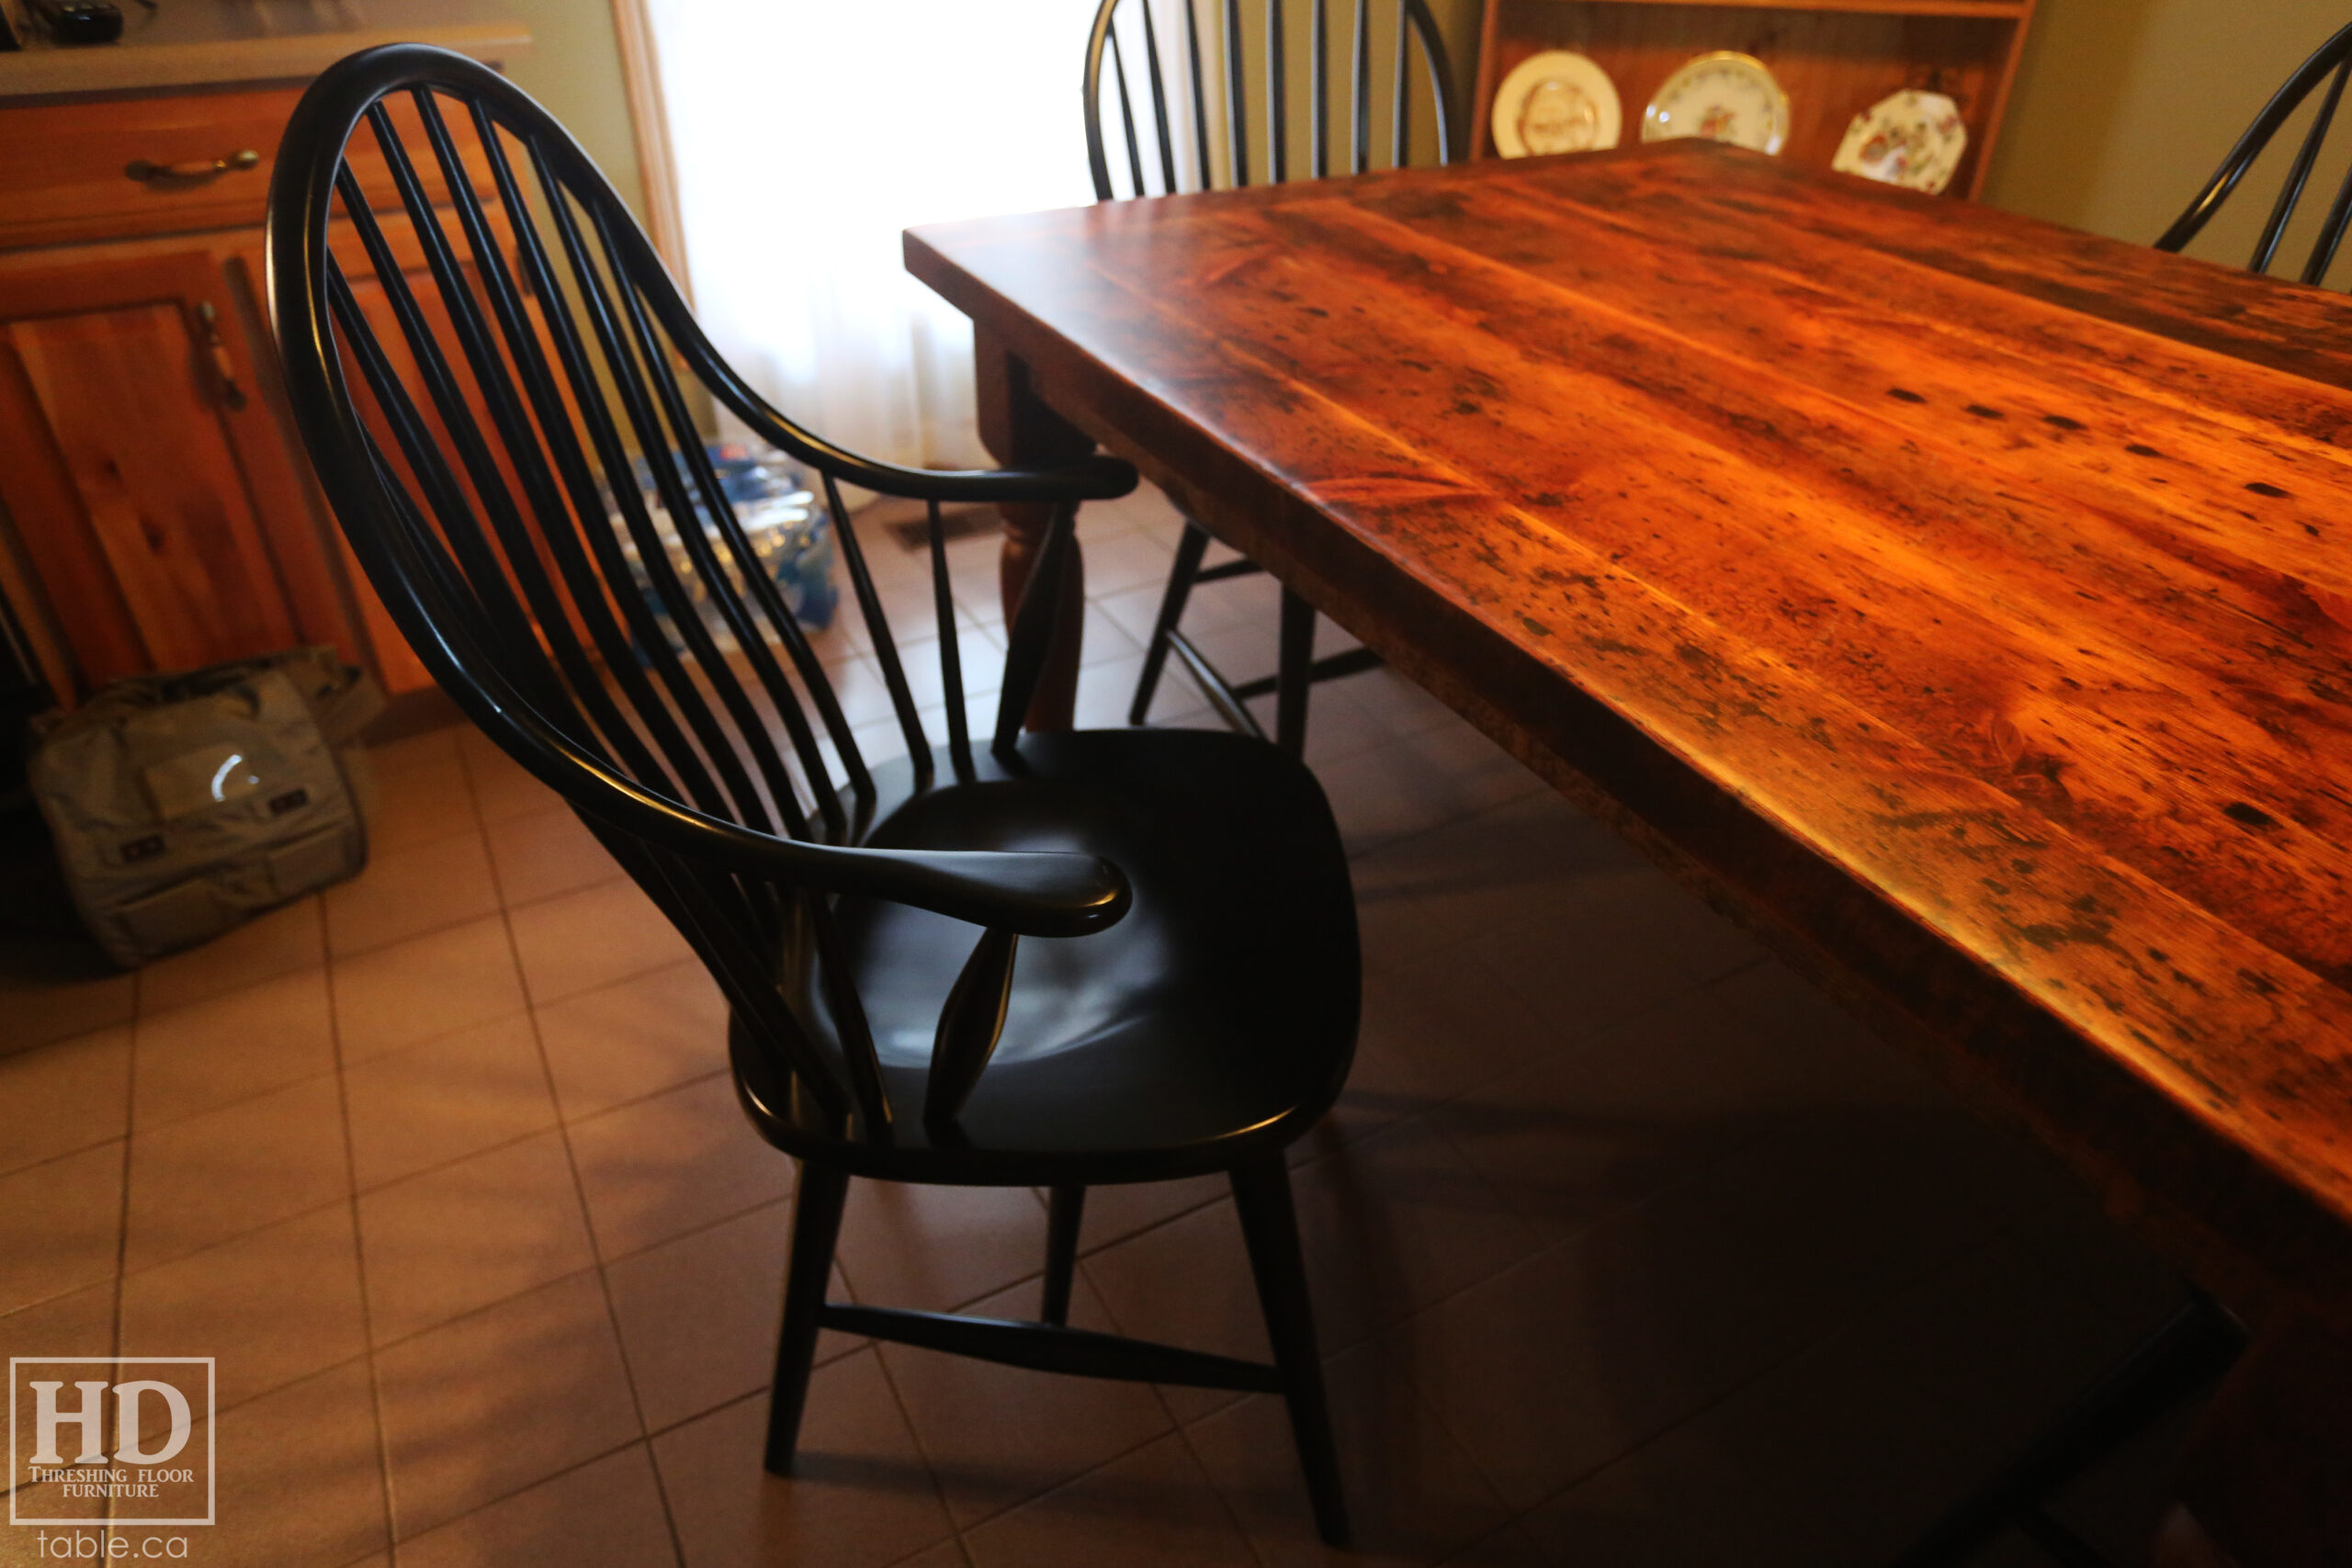 Harvest Table made from Reclaimed Wood for a Toronto Home by HD Threshing Floor Furniture / www.table.ca